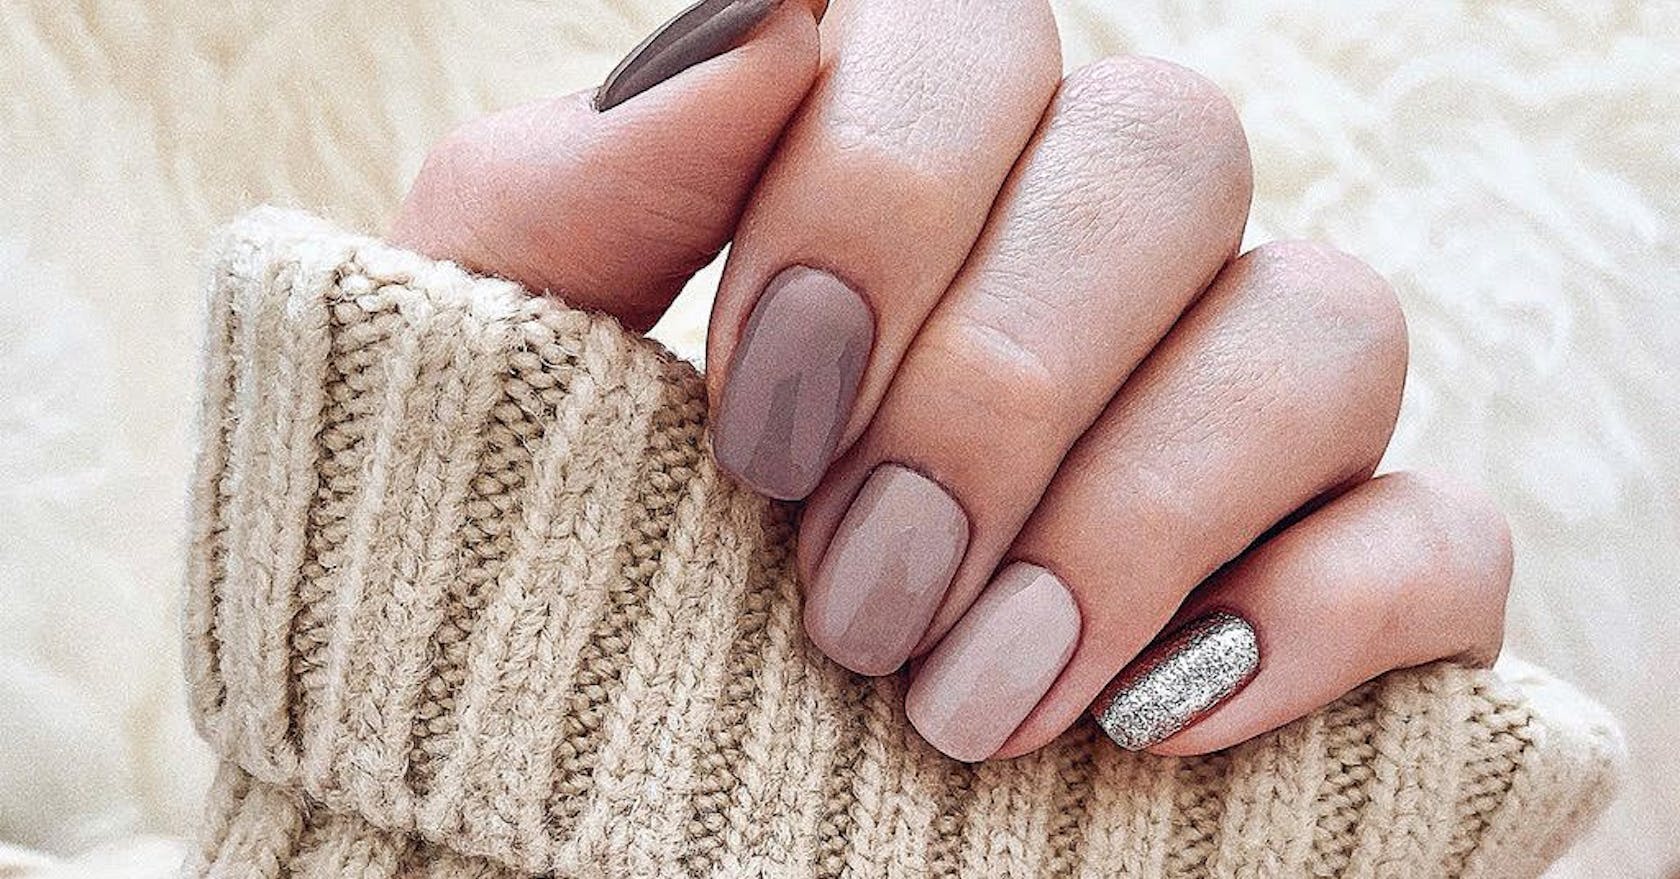 10. "Pale Skin Winter Nail Inspiration" - wide 6